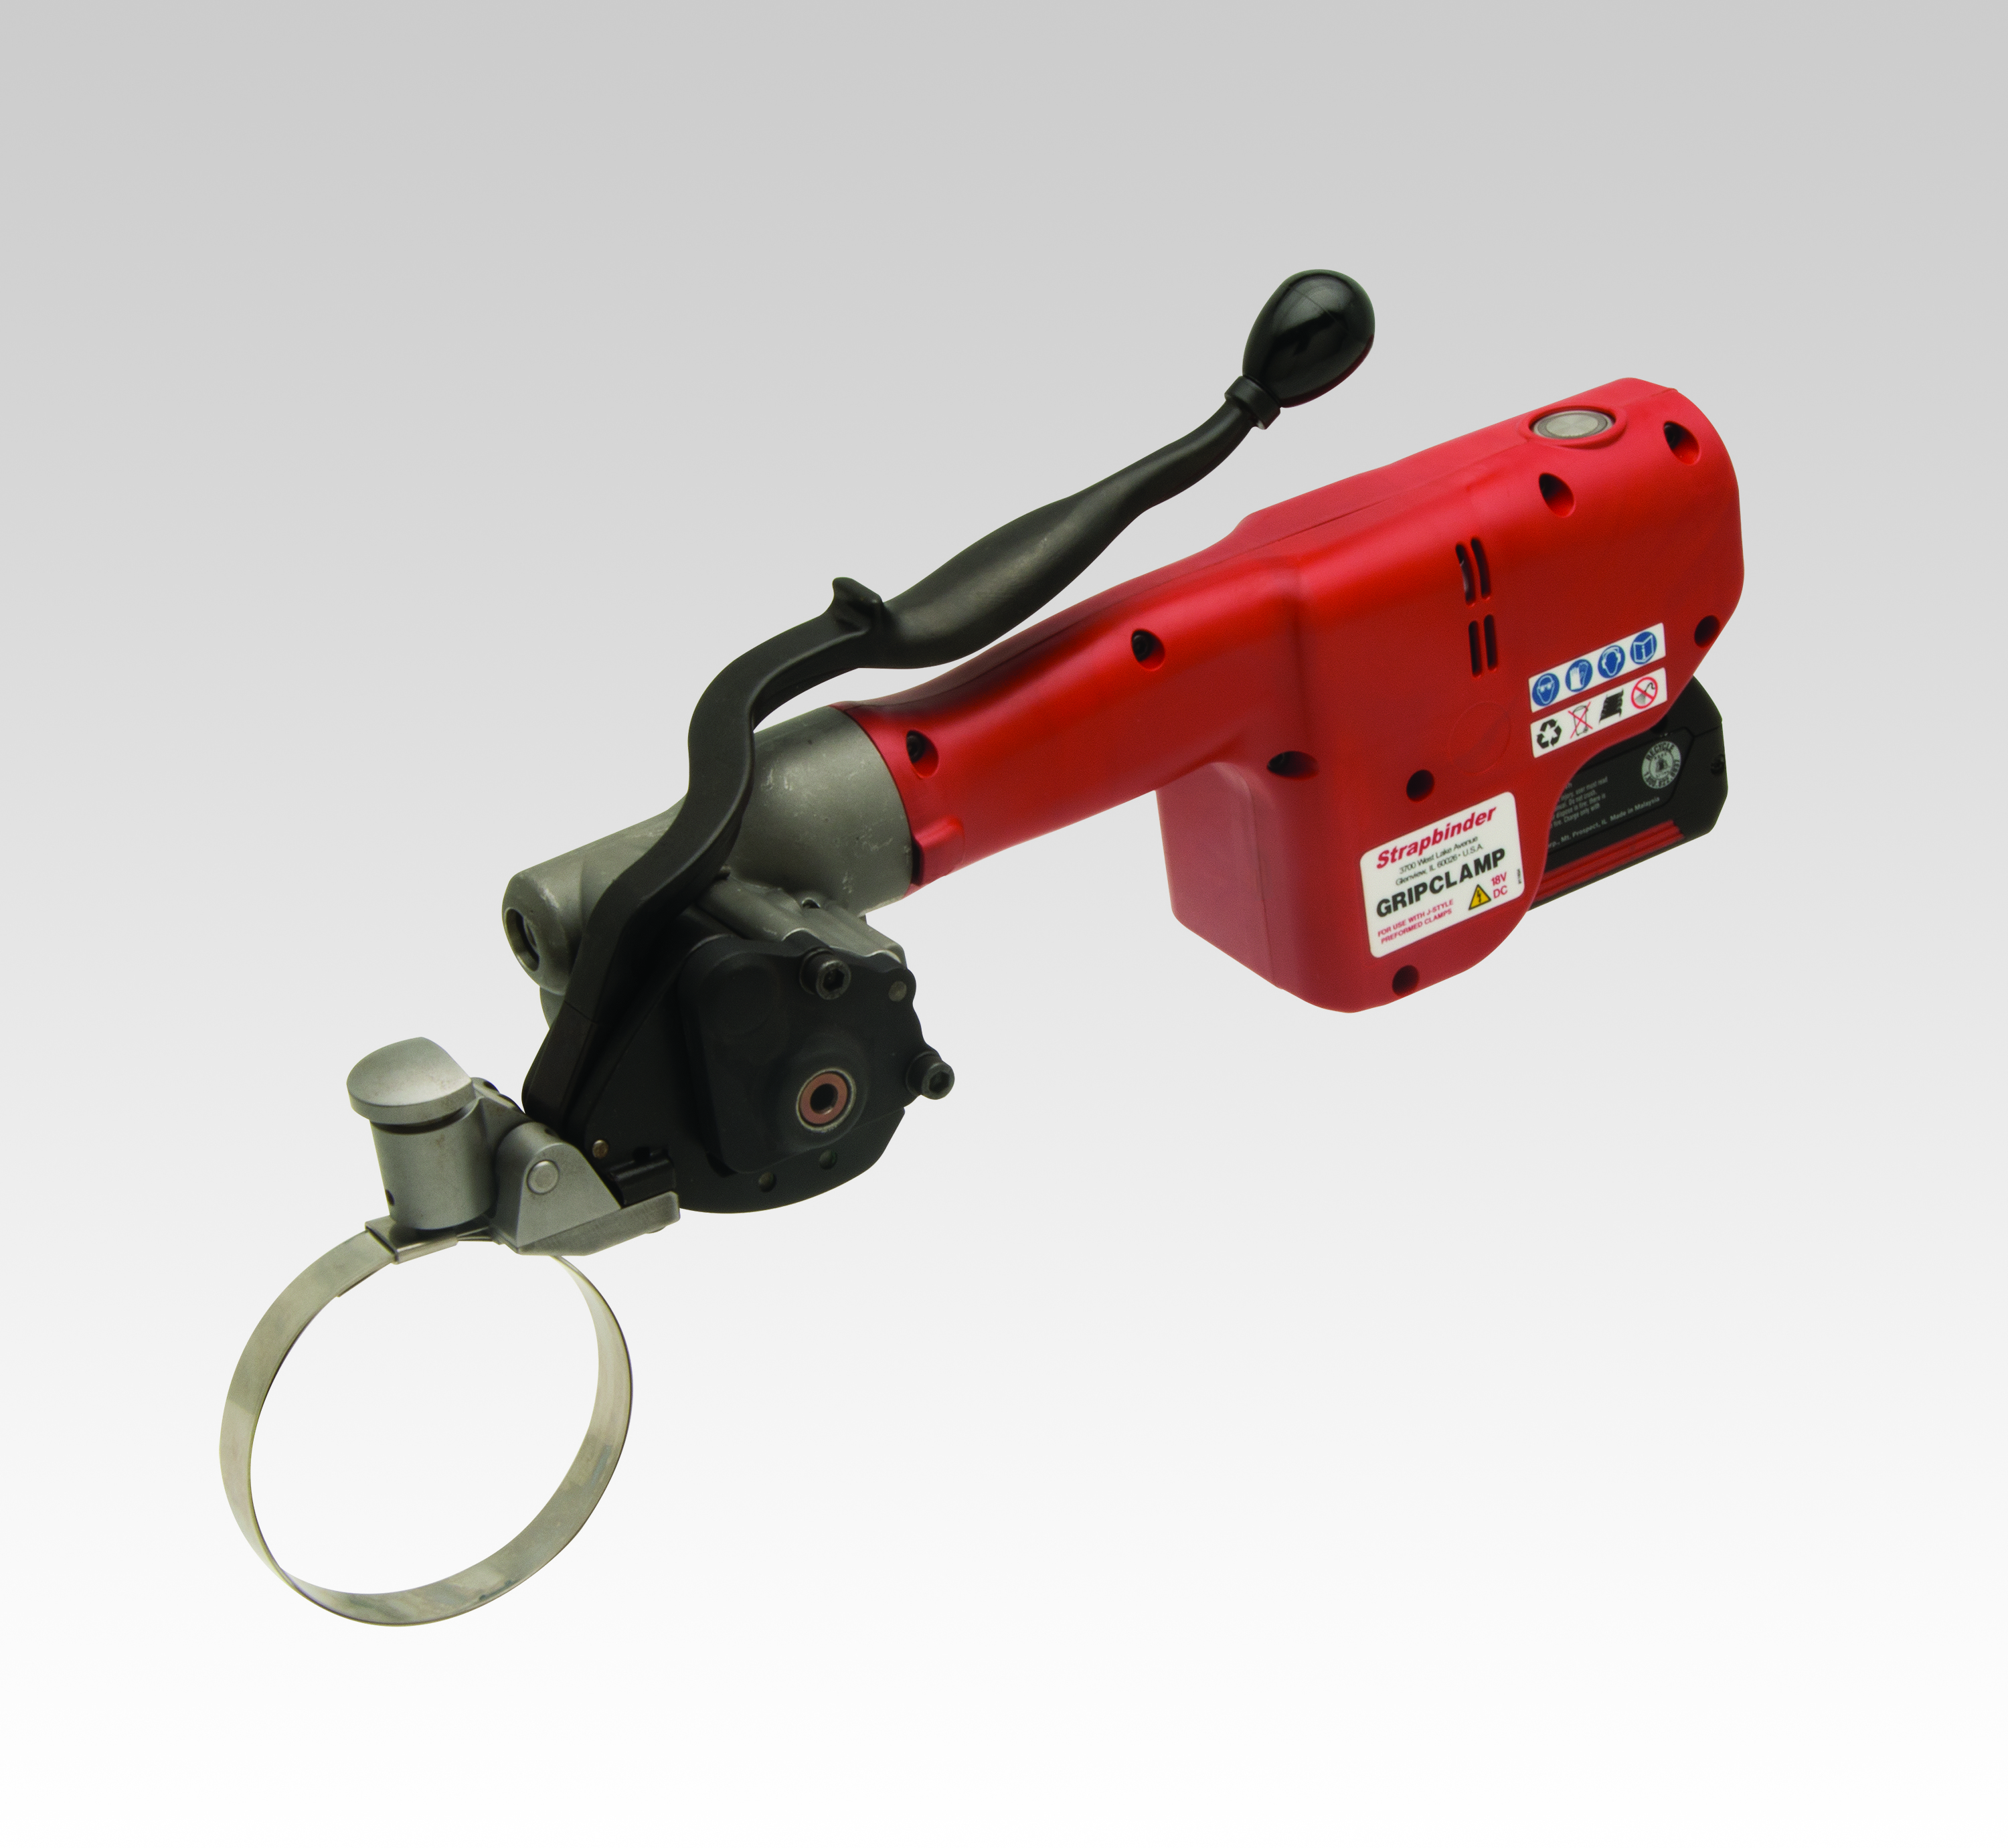 https://www.strapbinder.com/mm5/graphics/00000001/GripClamp_with_Center%20Punch%20attachment_flat.jpg